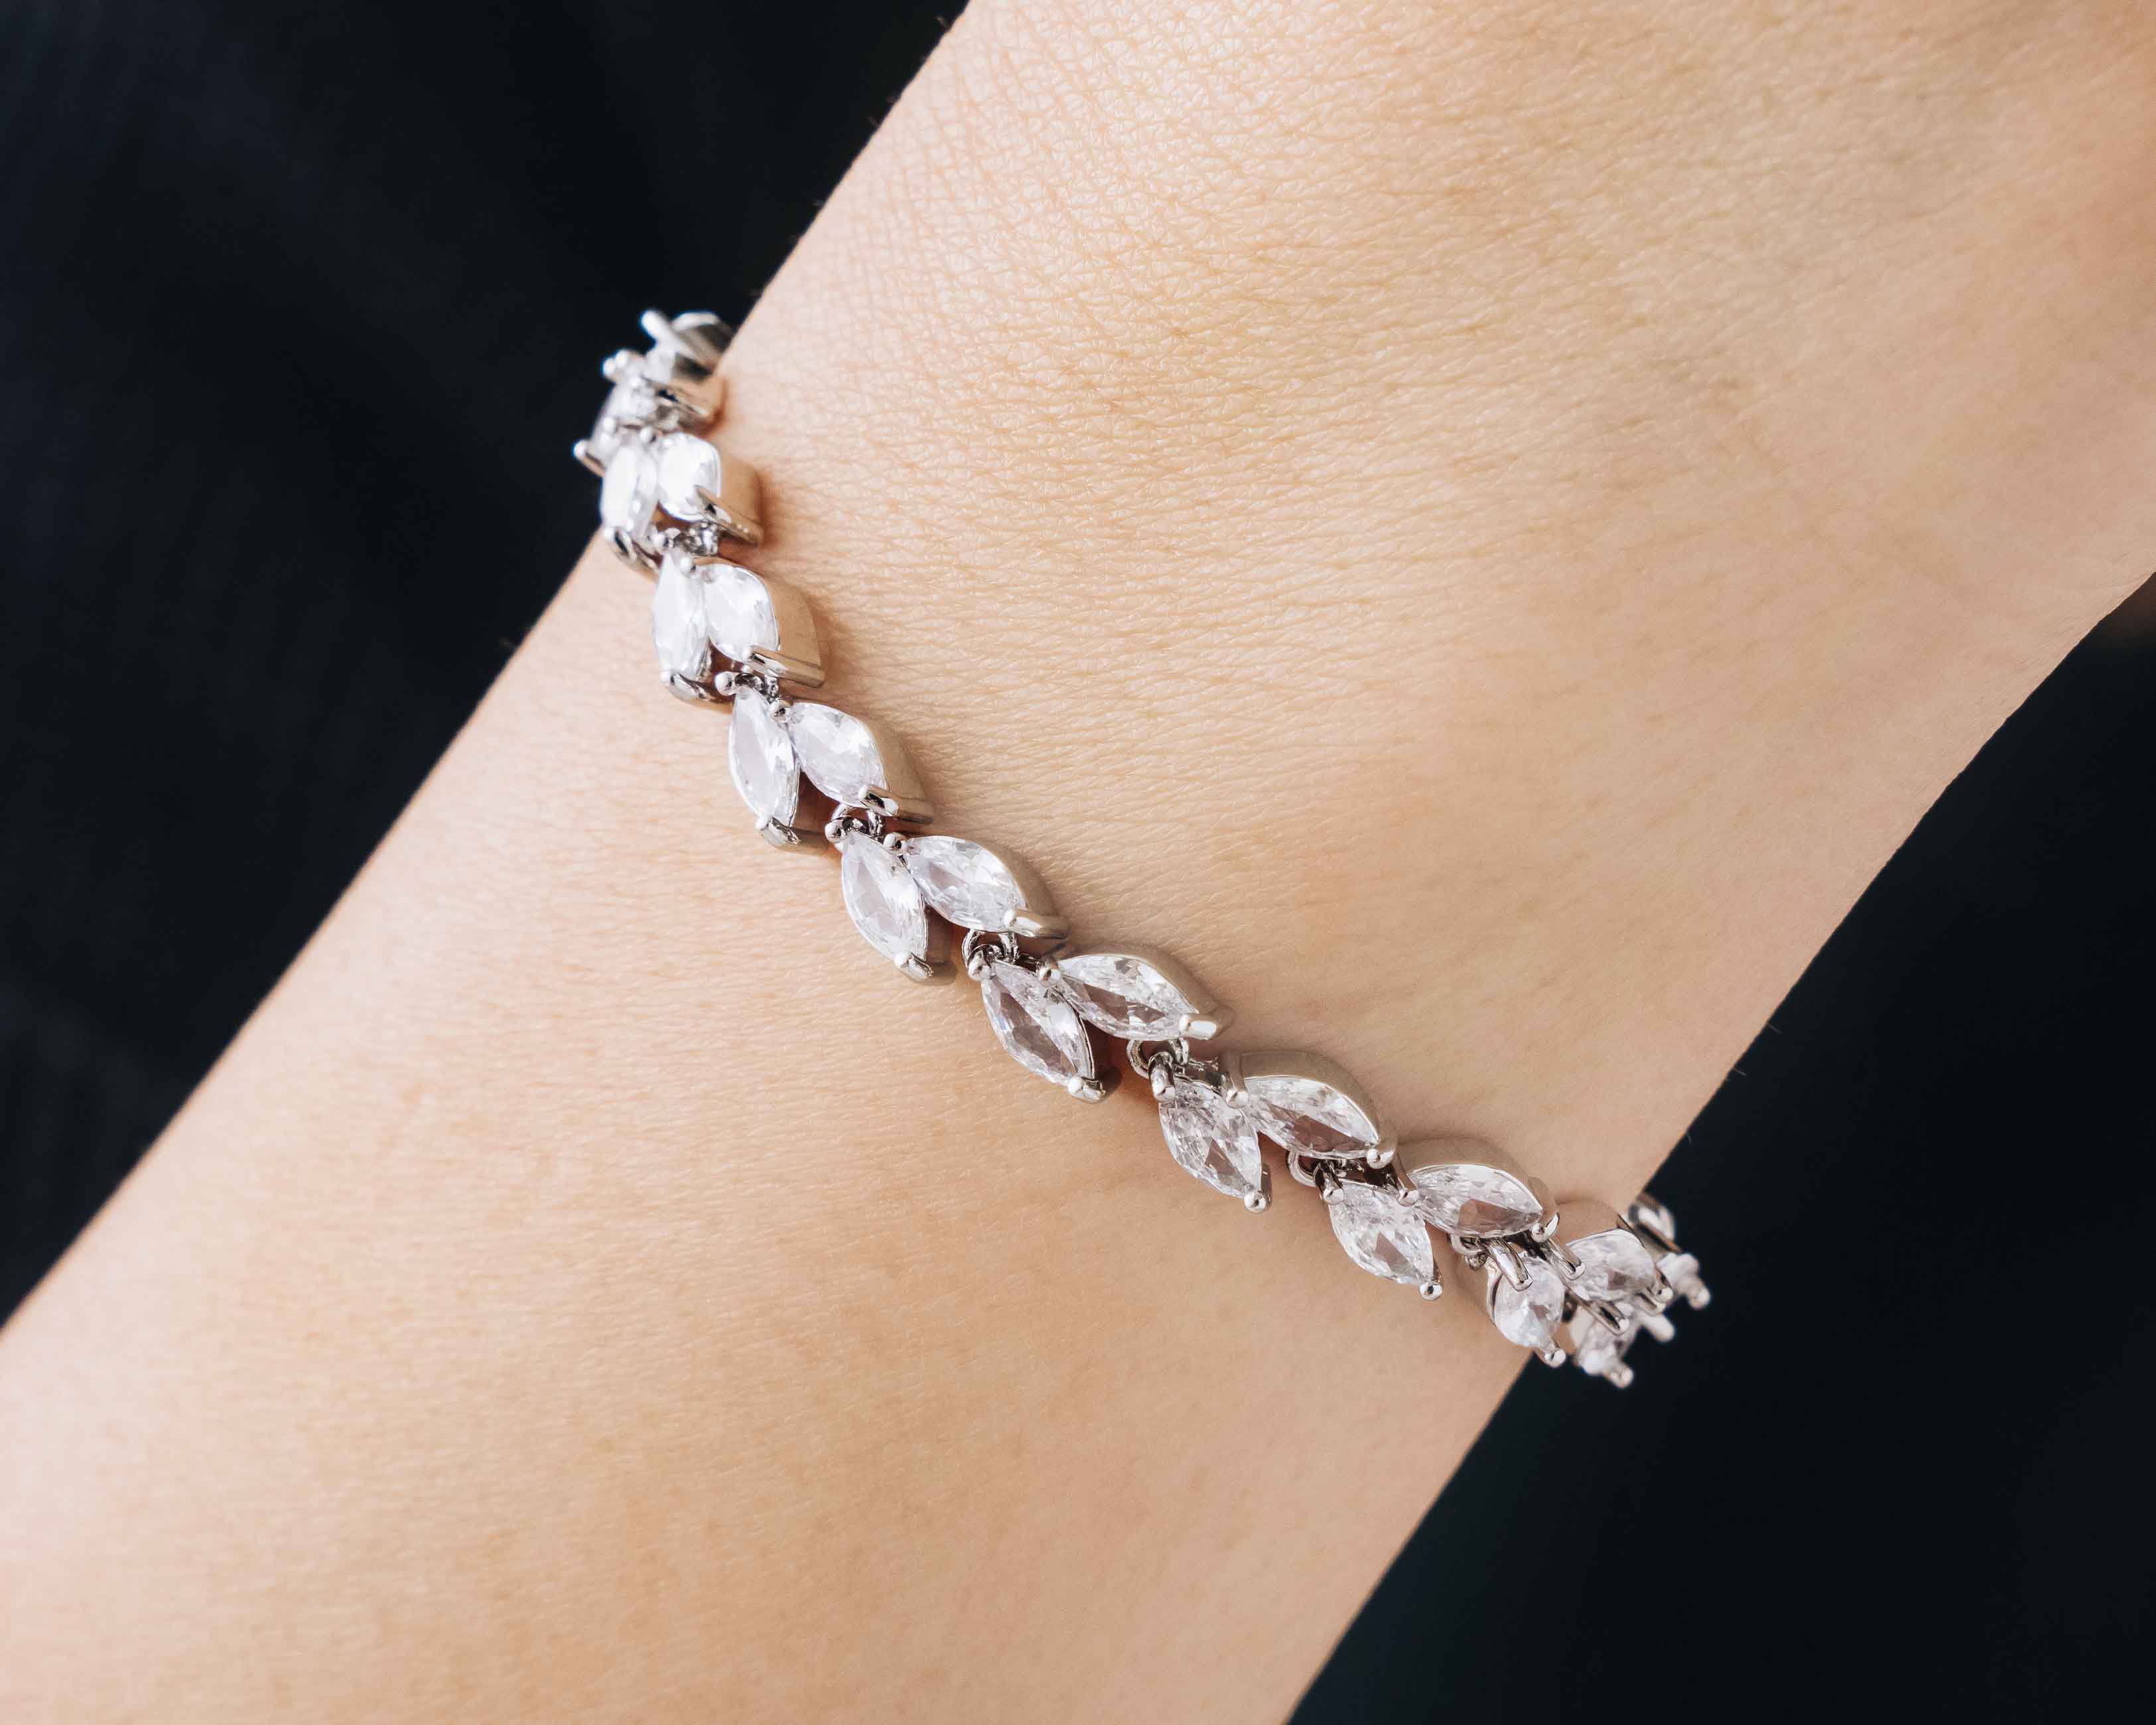 The Bridal Dainty Bracelet displayed from different angles, highlighting its delicate design and charming details.